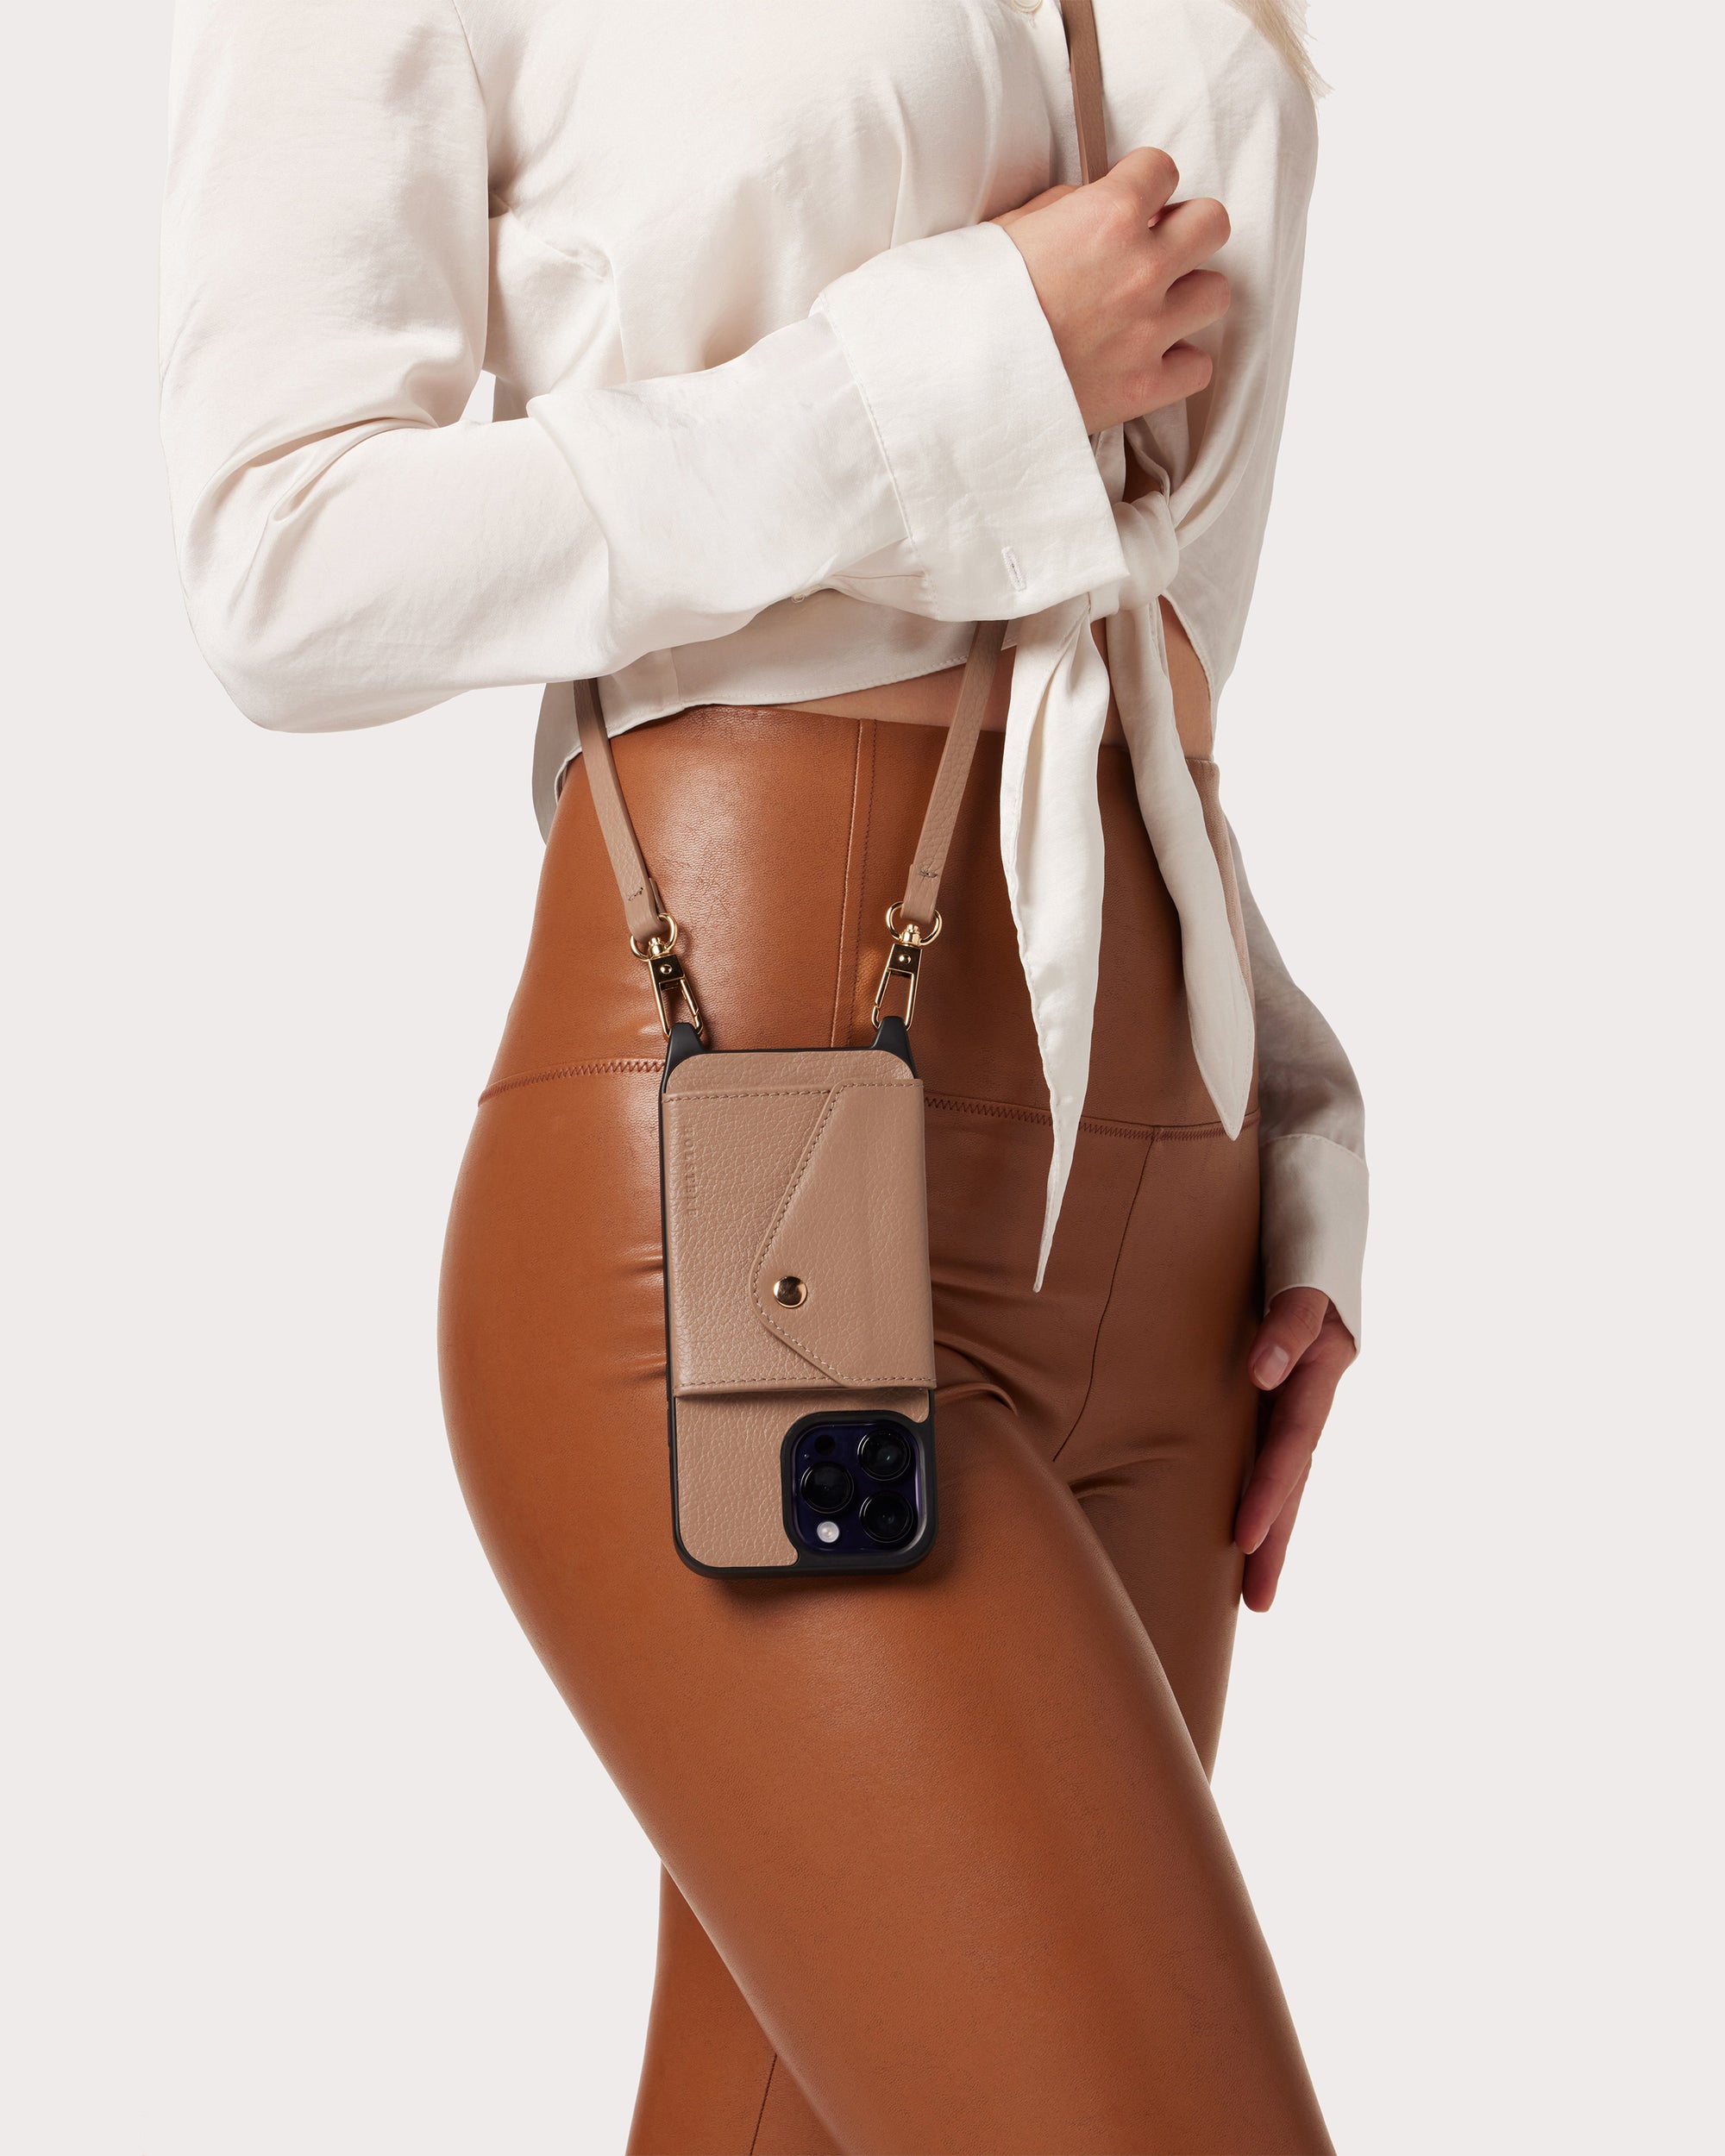 Phone Case That Is a Purse – Keebos